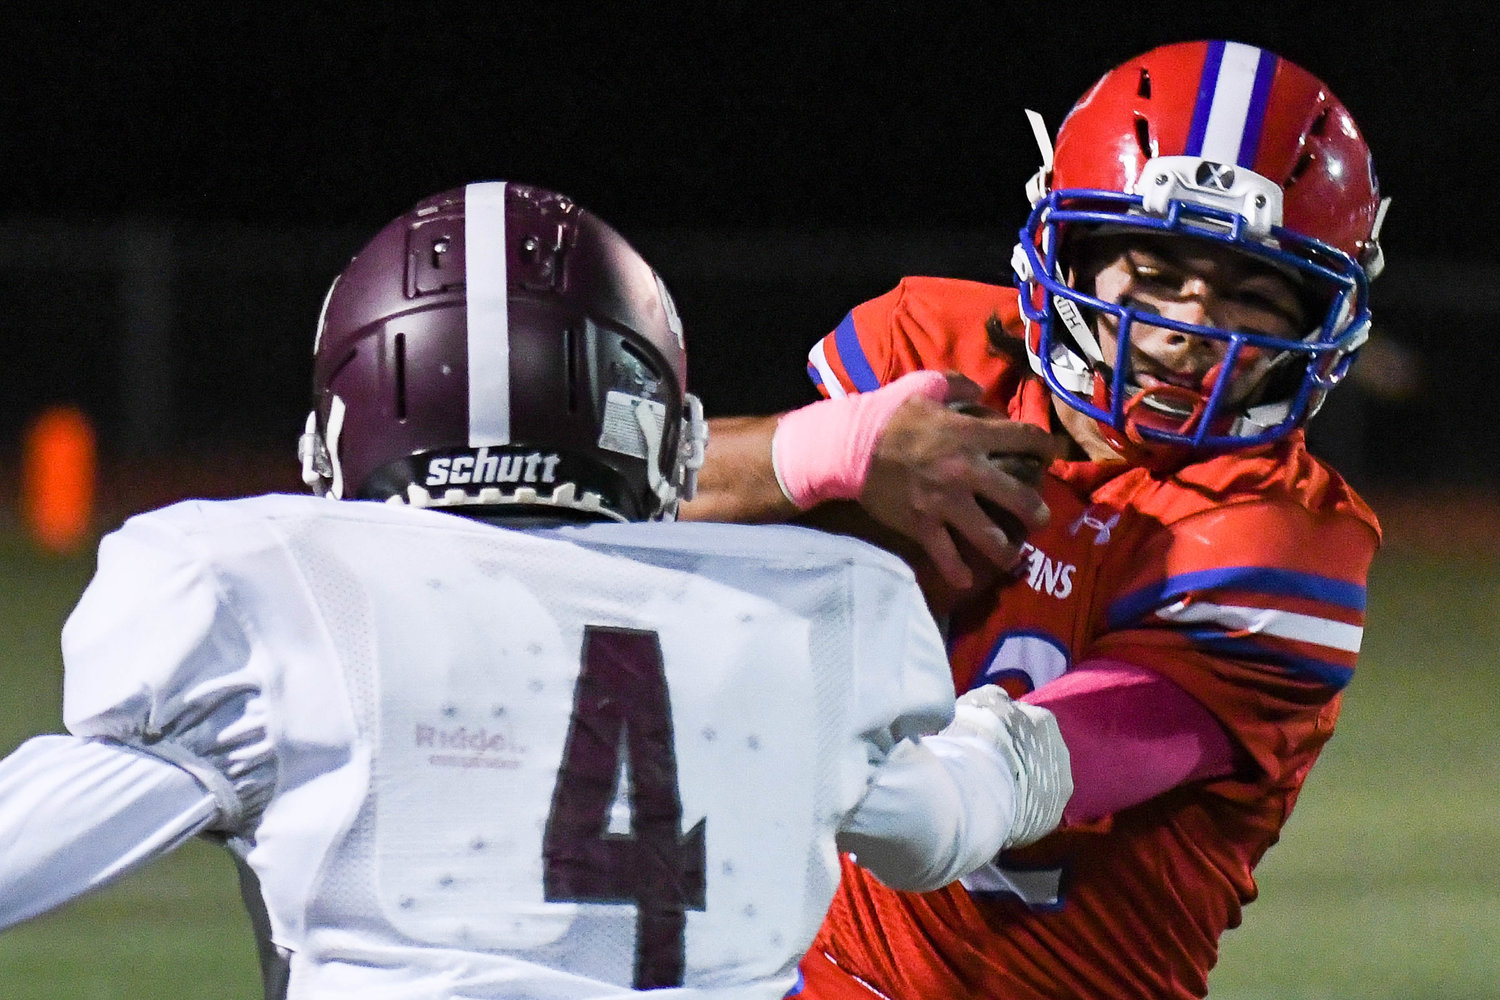 New Hartford running back Angelo Santomassino jukes Corcoran's Jahmere Clarke Friday night in New Hartford. The Spartans won 21-12 to advance to the Section III Class A semifinals.